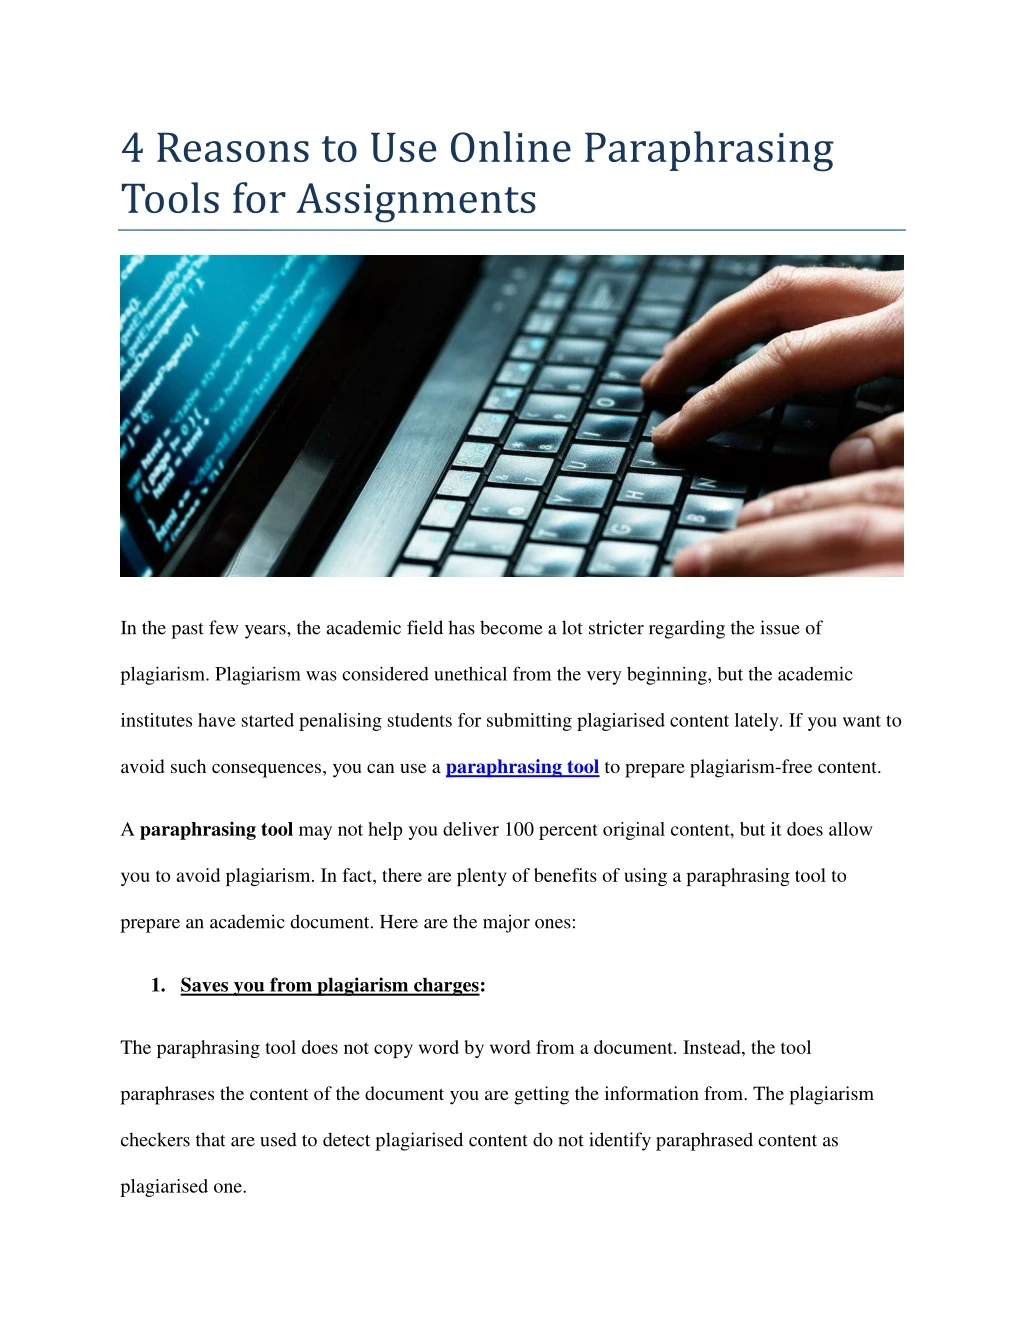 4 reasons to use online paraphrasing tools